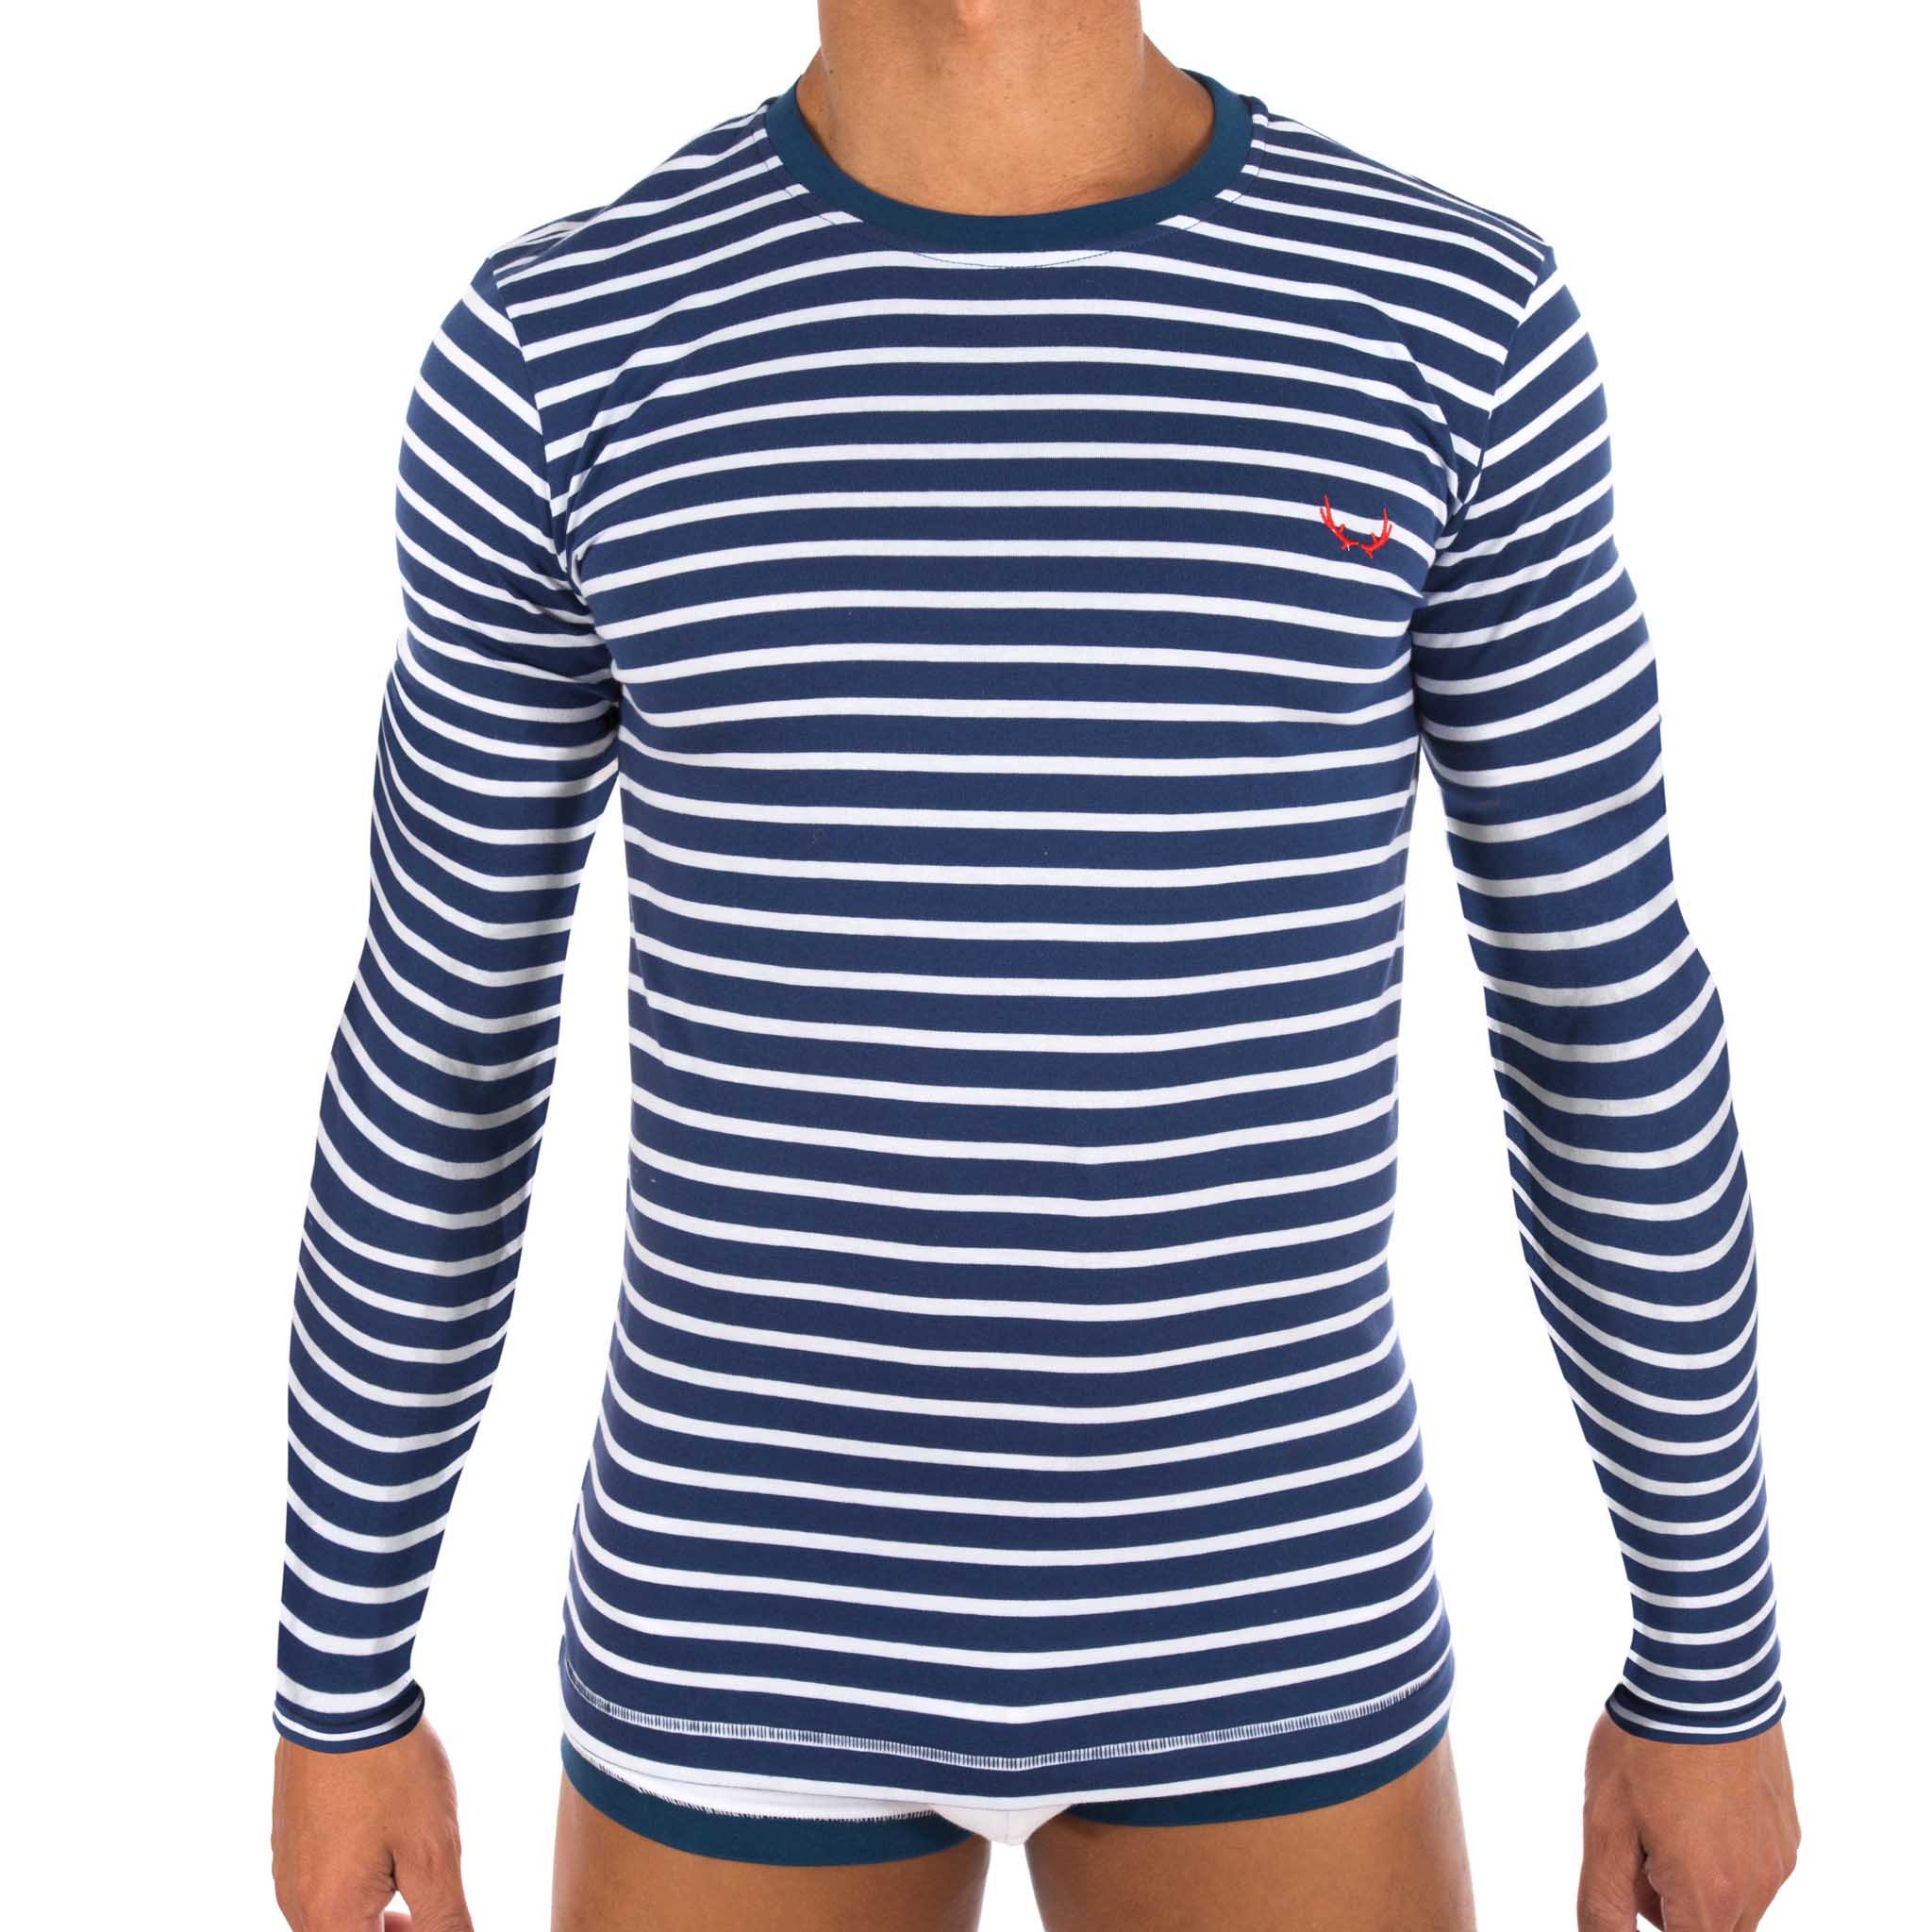 Blue and white striped, long-sleeved T-shirt made of organic cotton from Bluebuck